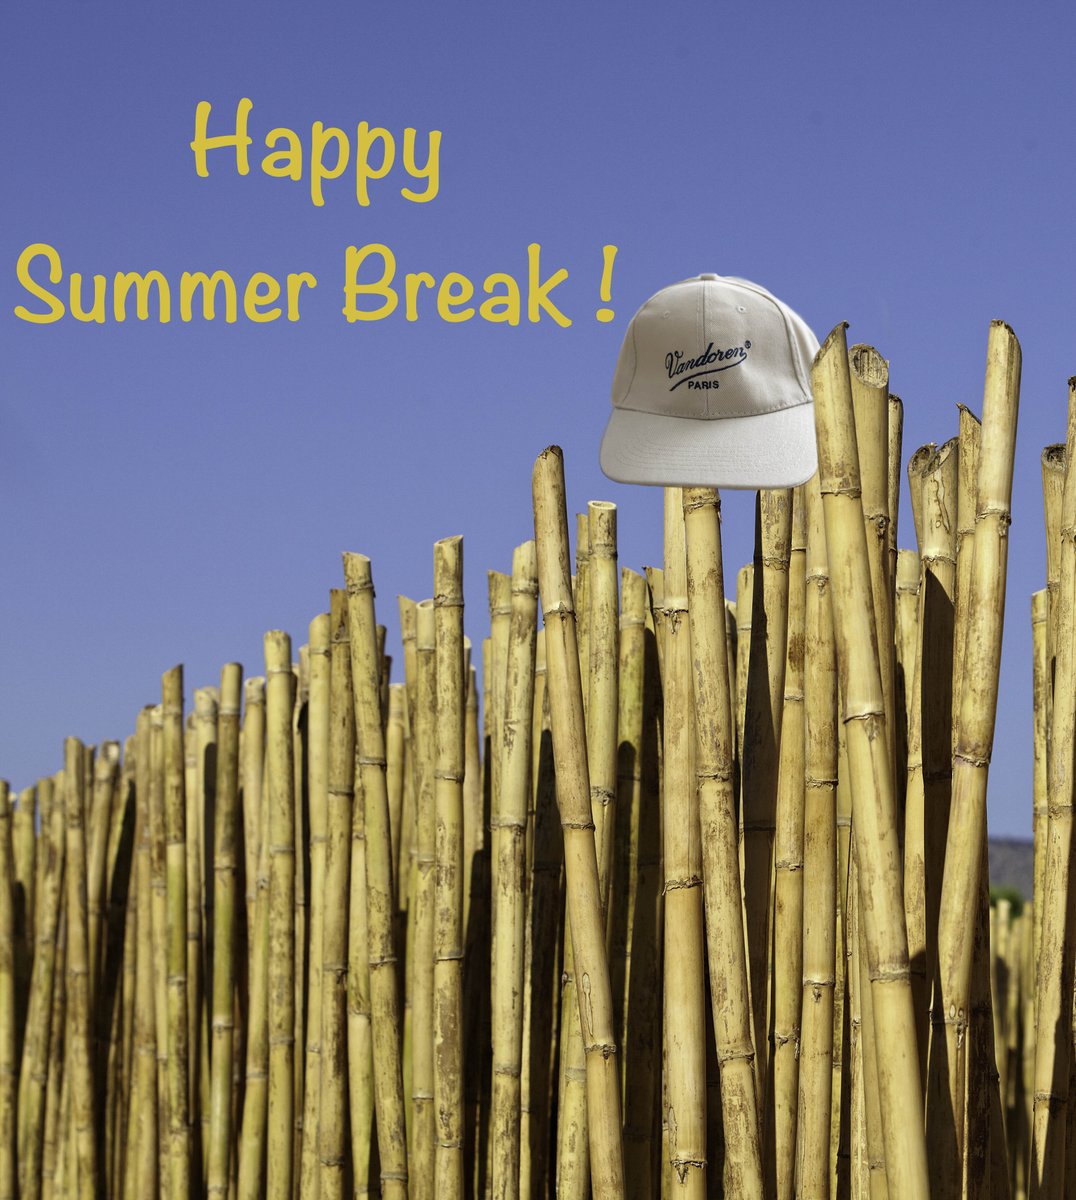 Summer break : Vandoren showroom in Paris will close on next Friday, July 26th at 4:00 PM and will reopen on Tuesday, August 27th at 9:00 AM. Wishing you a nice summer !